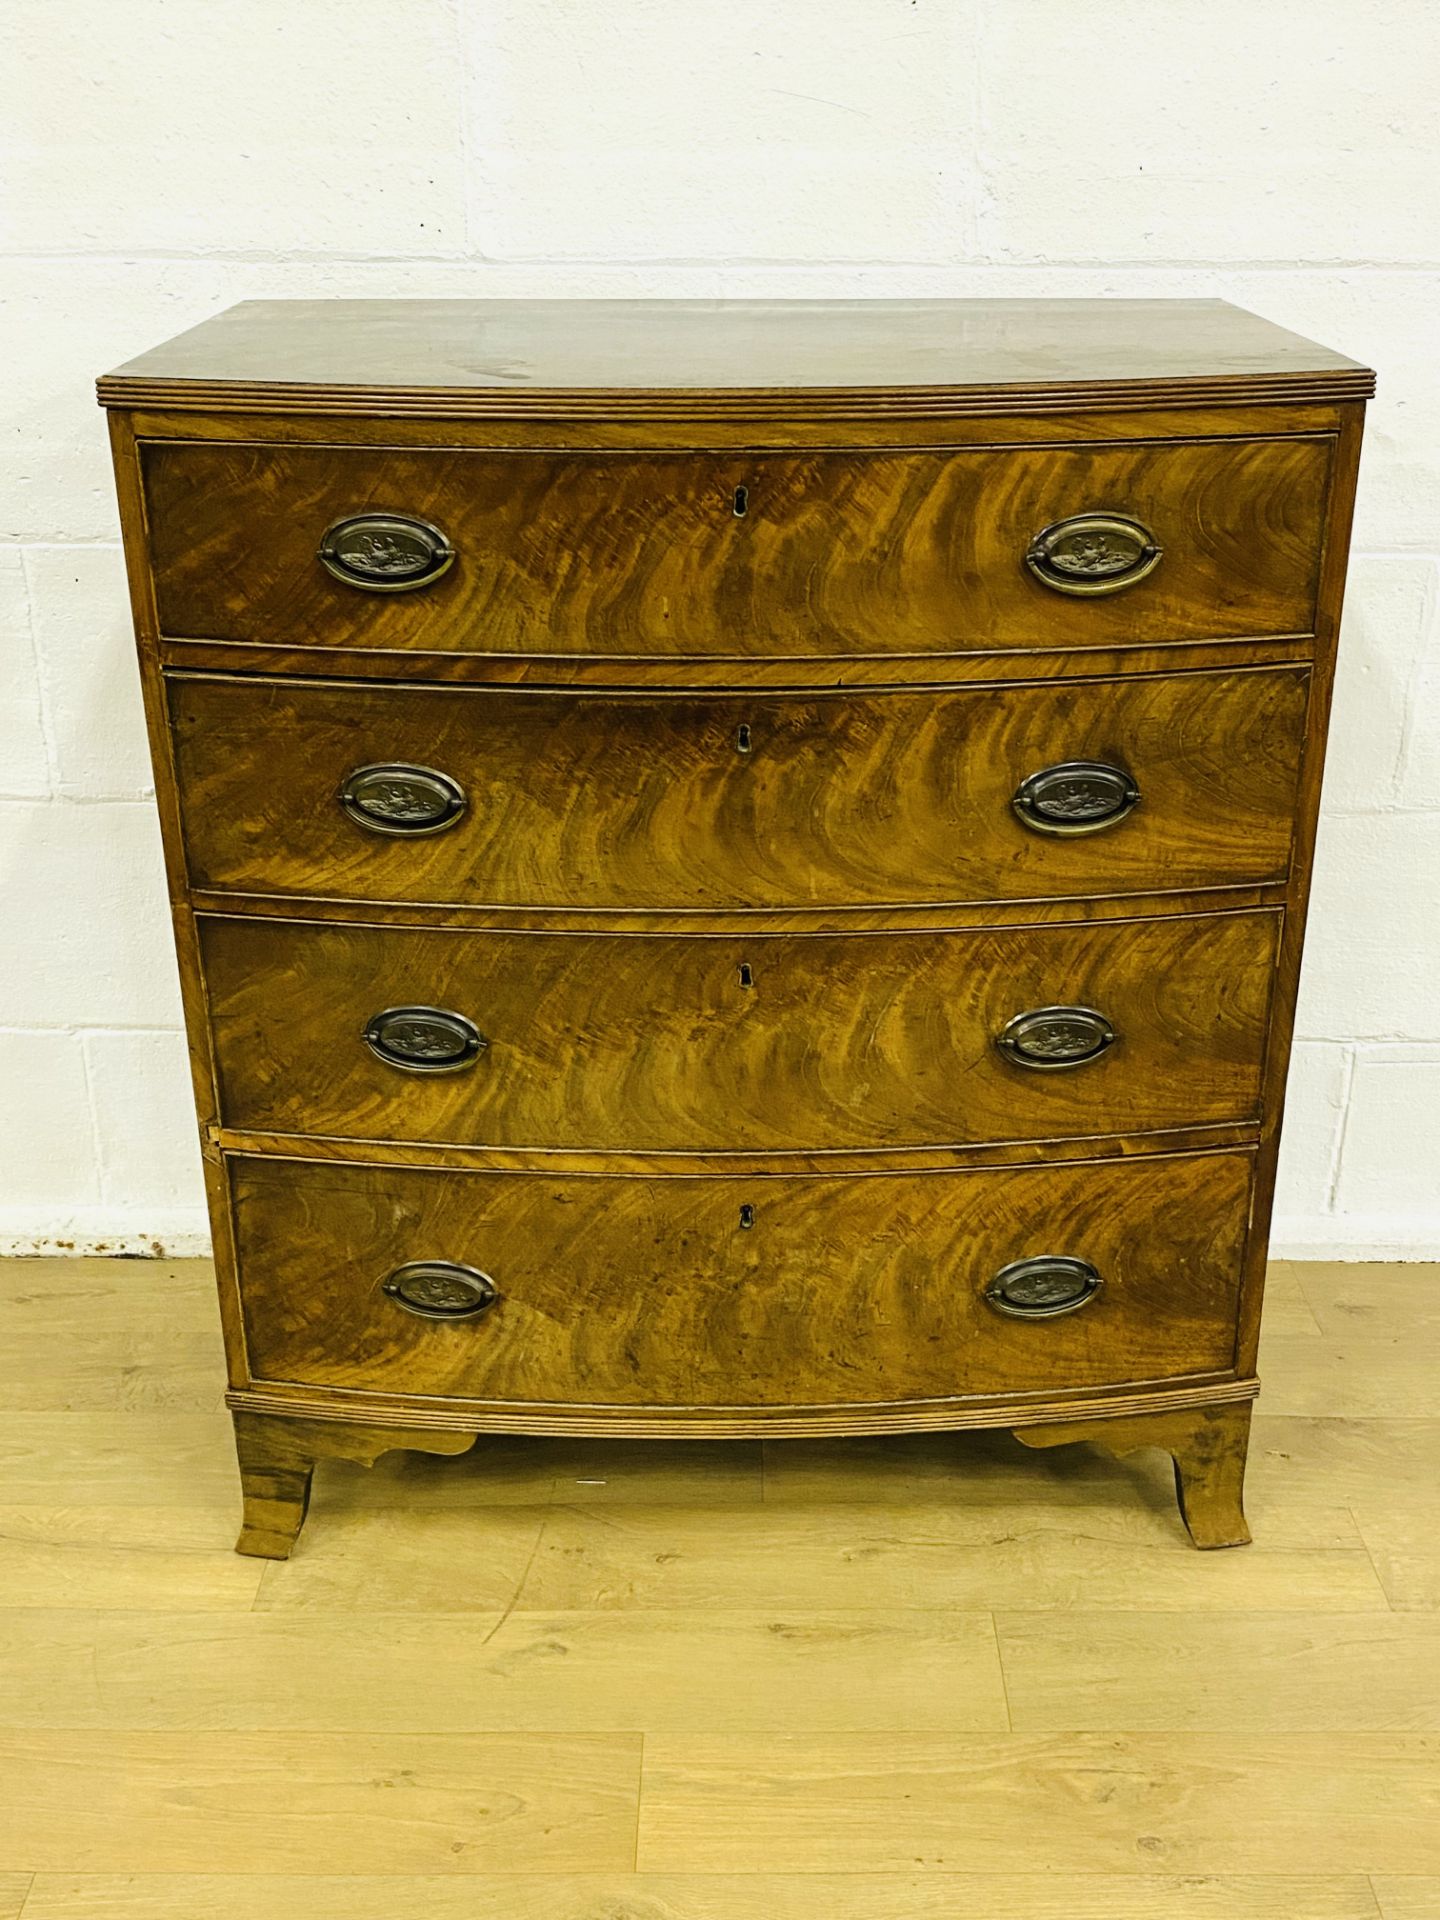 Bow fronted chest of drawers - Image 7 of 8